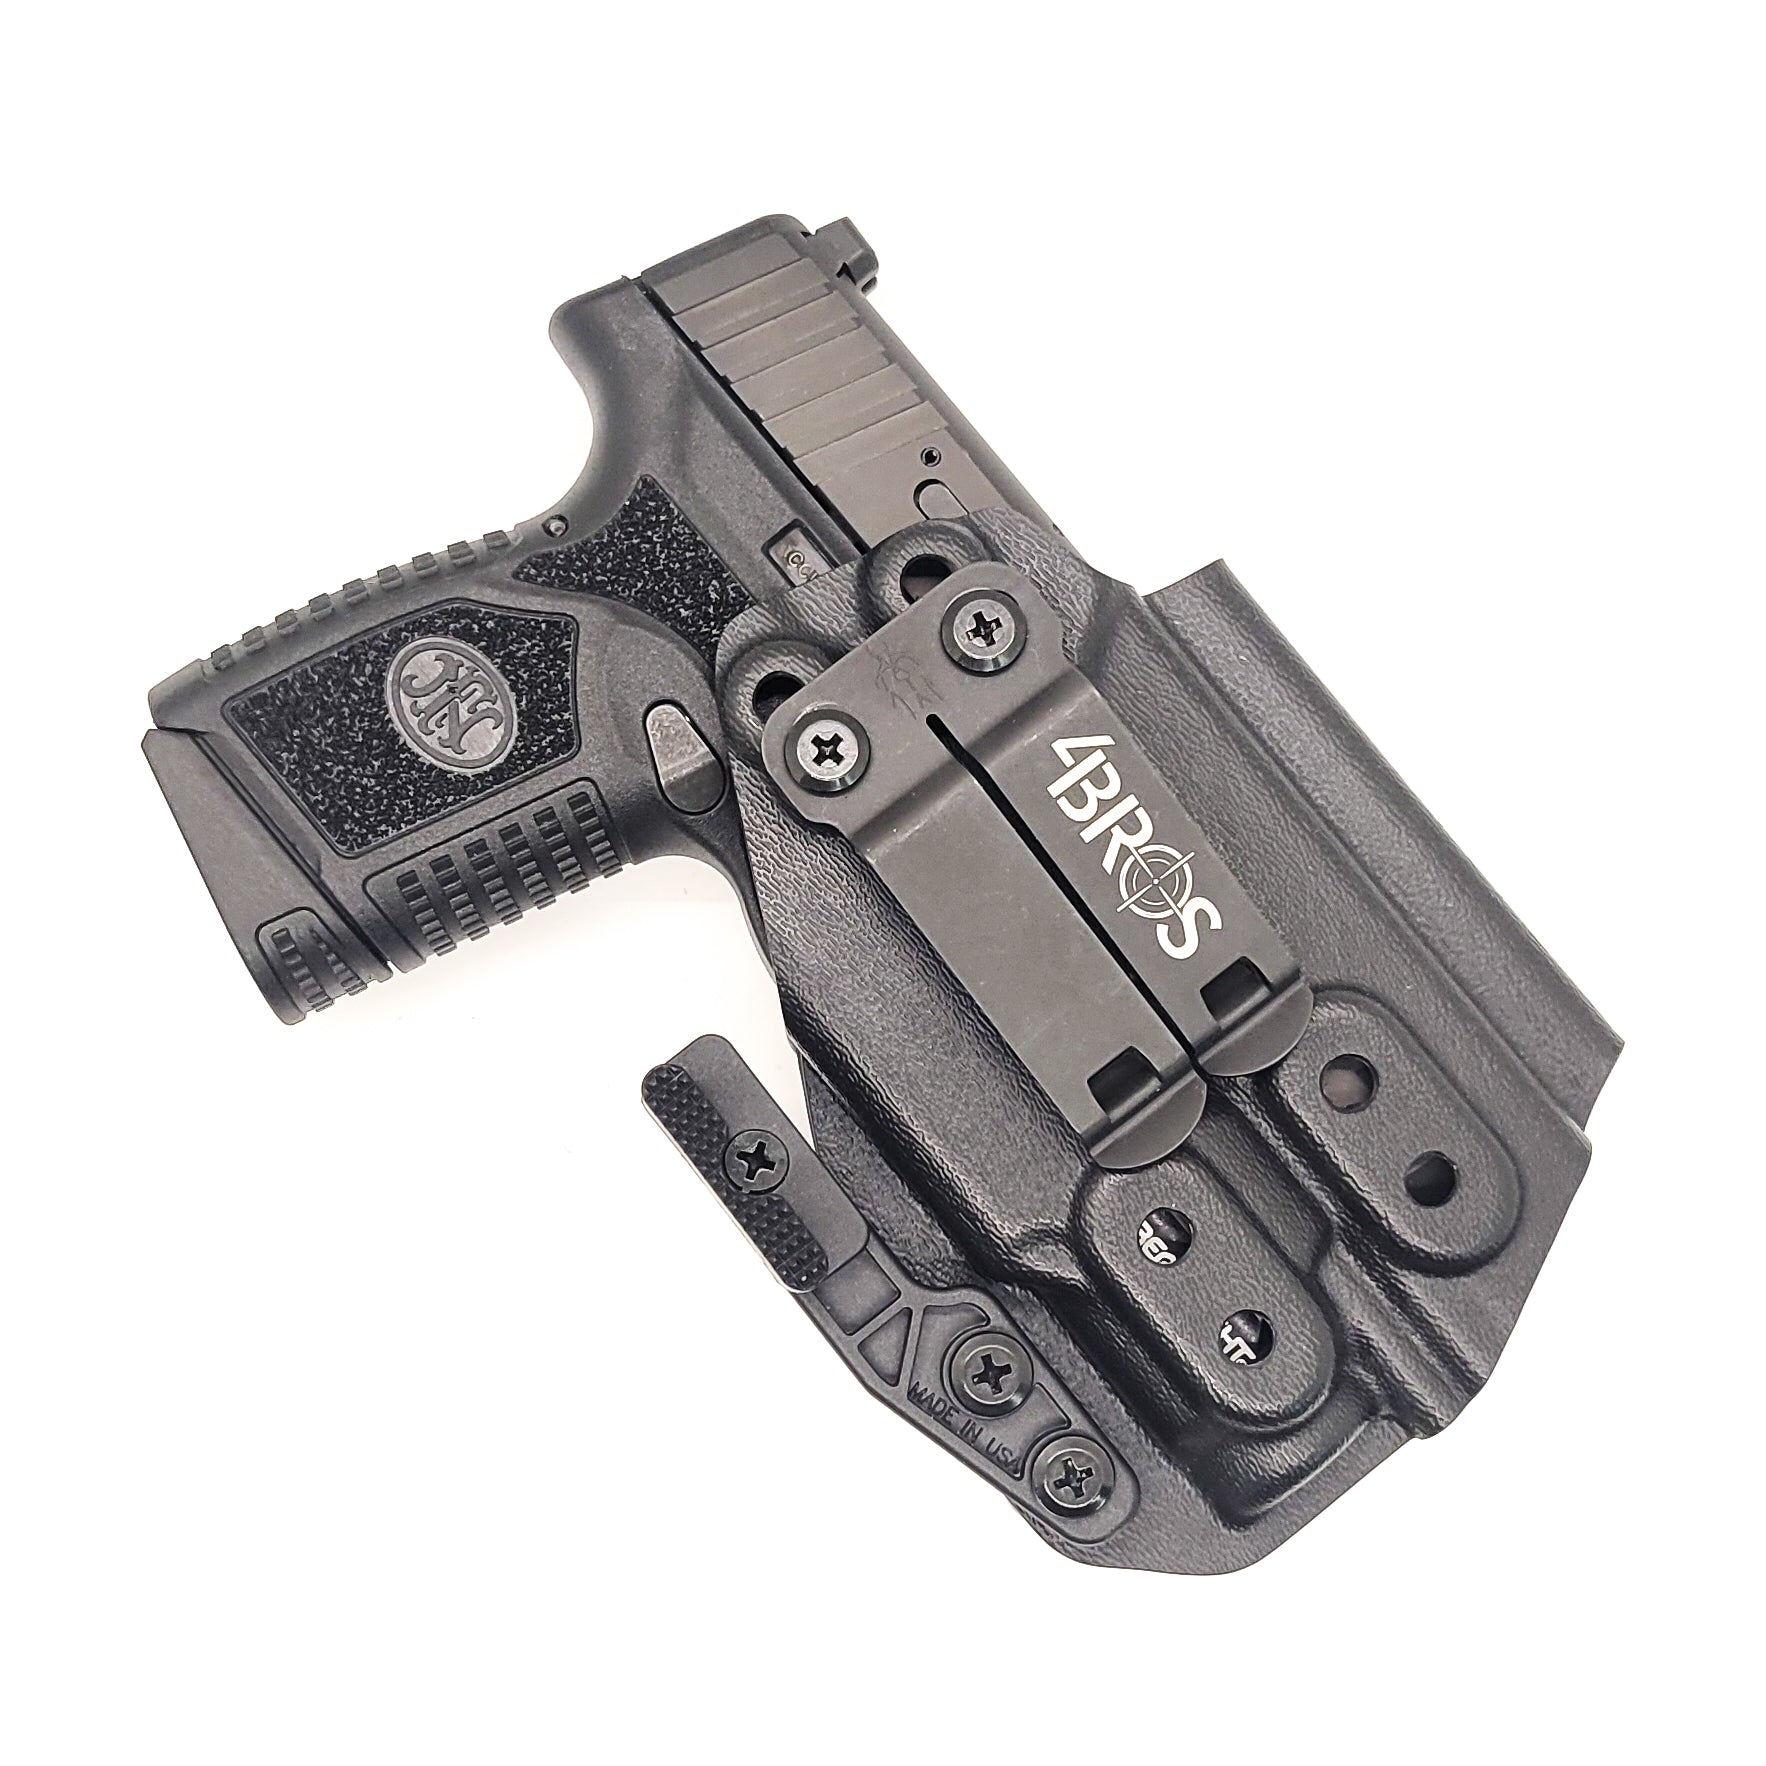 For the best, most comfortable concealed IWB AIWB inside waistband kydex holster designed for the FN Reflex pistol with the Streamlight GL TLR-7 Sub (69400), shop Four Brothers Holsters.  Adjustable retention, open muzzle, profile cut for red dot optics or sights.  Suitable for pocket carry.  Made in the USA. FN REFLEX